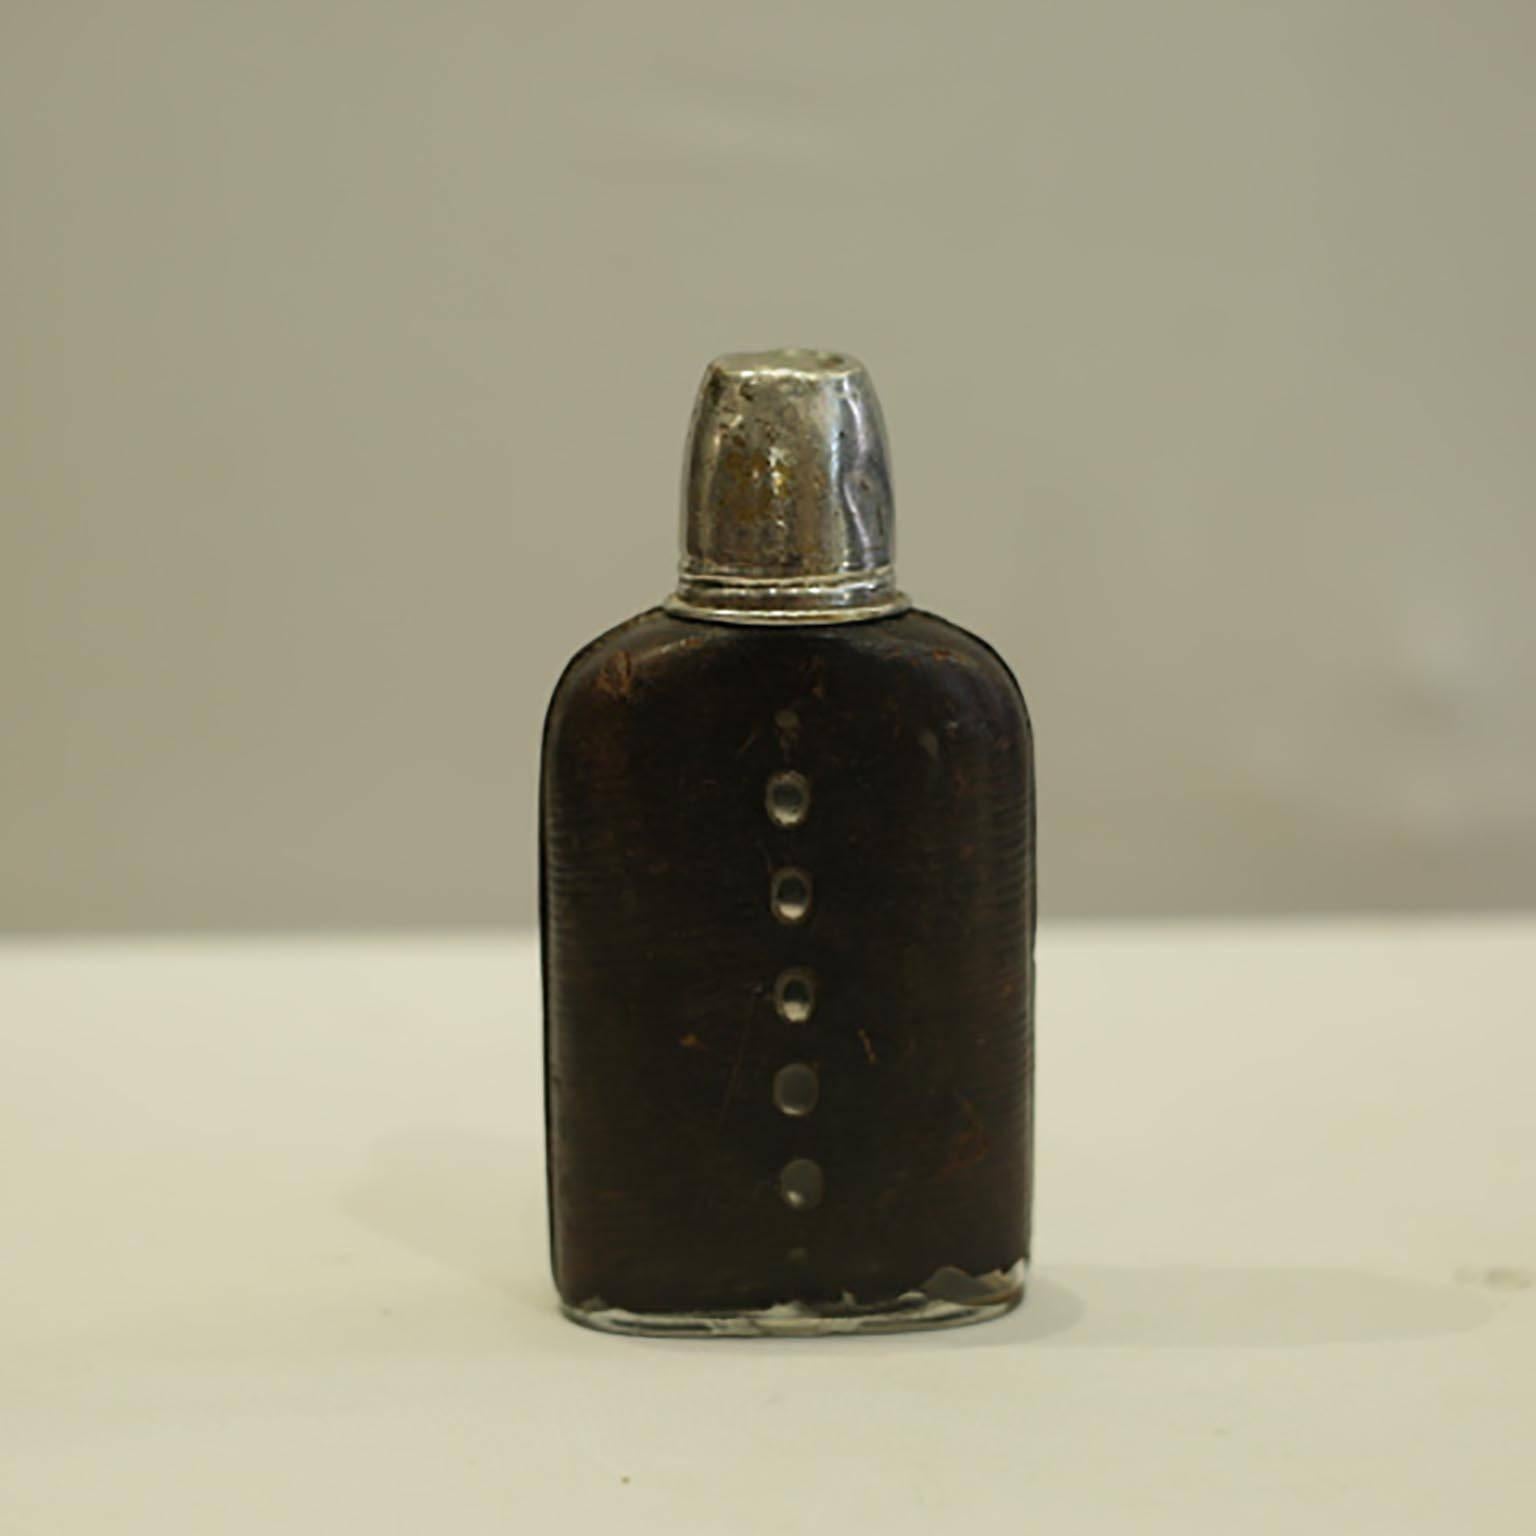 Heavy glass flask wrapped in distressed leather with perforation on both sides to see the liquor inside. The silver plated cup screws onto the flask.